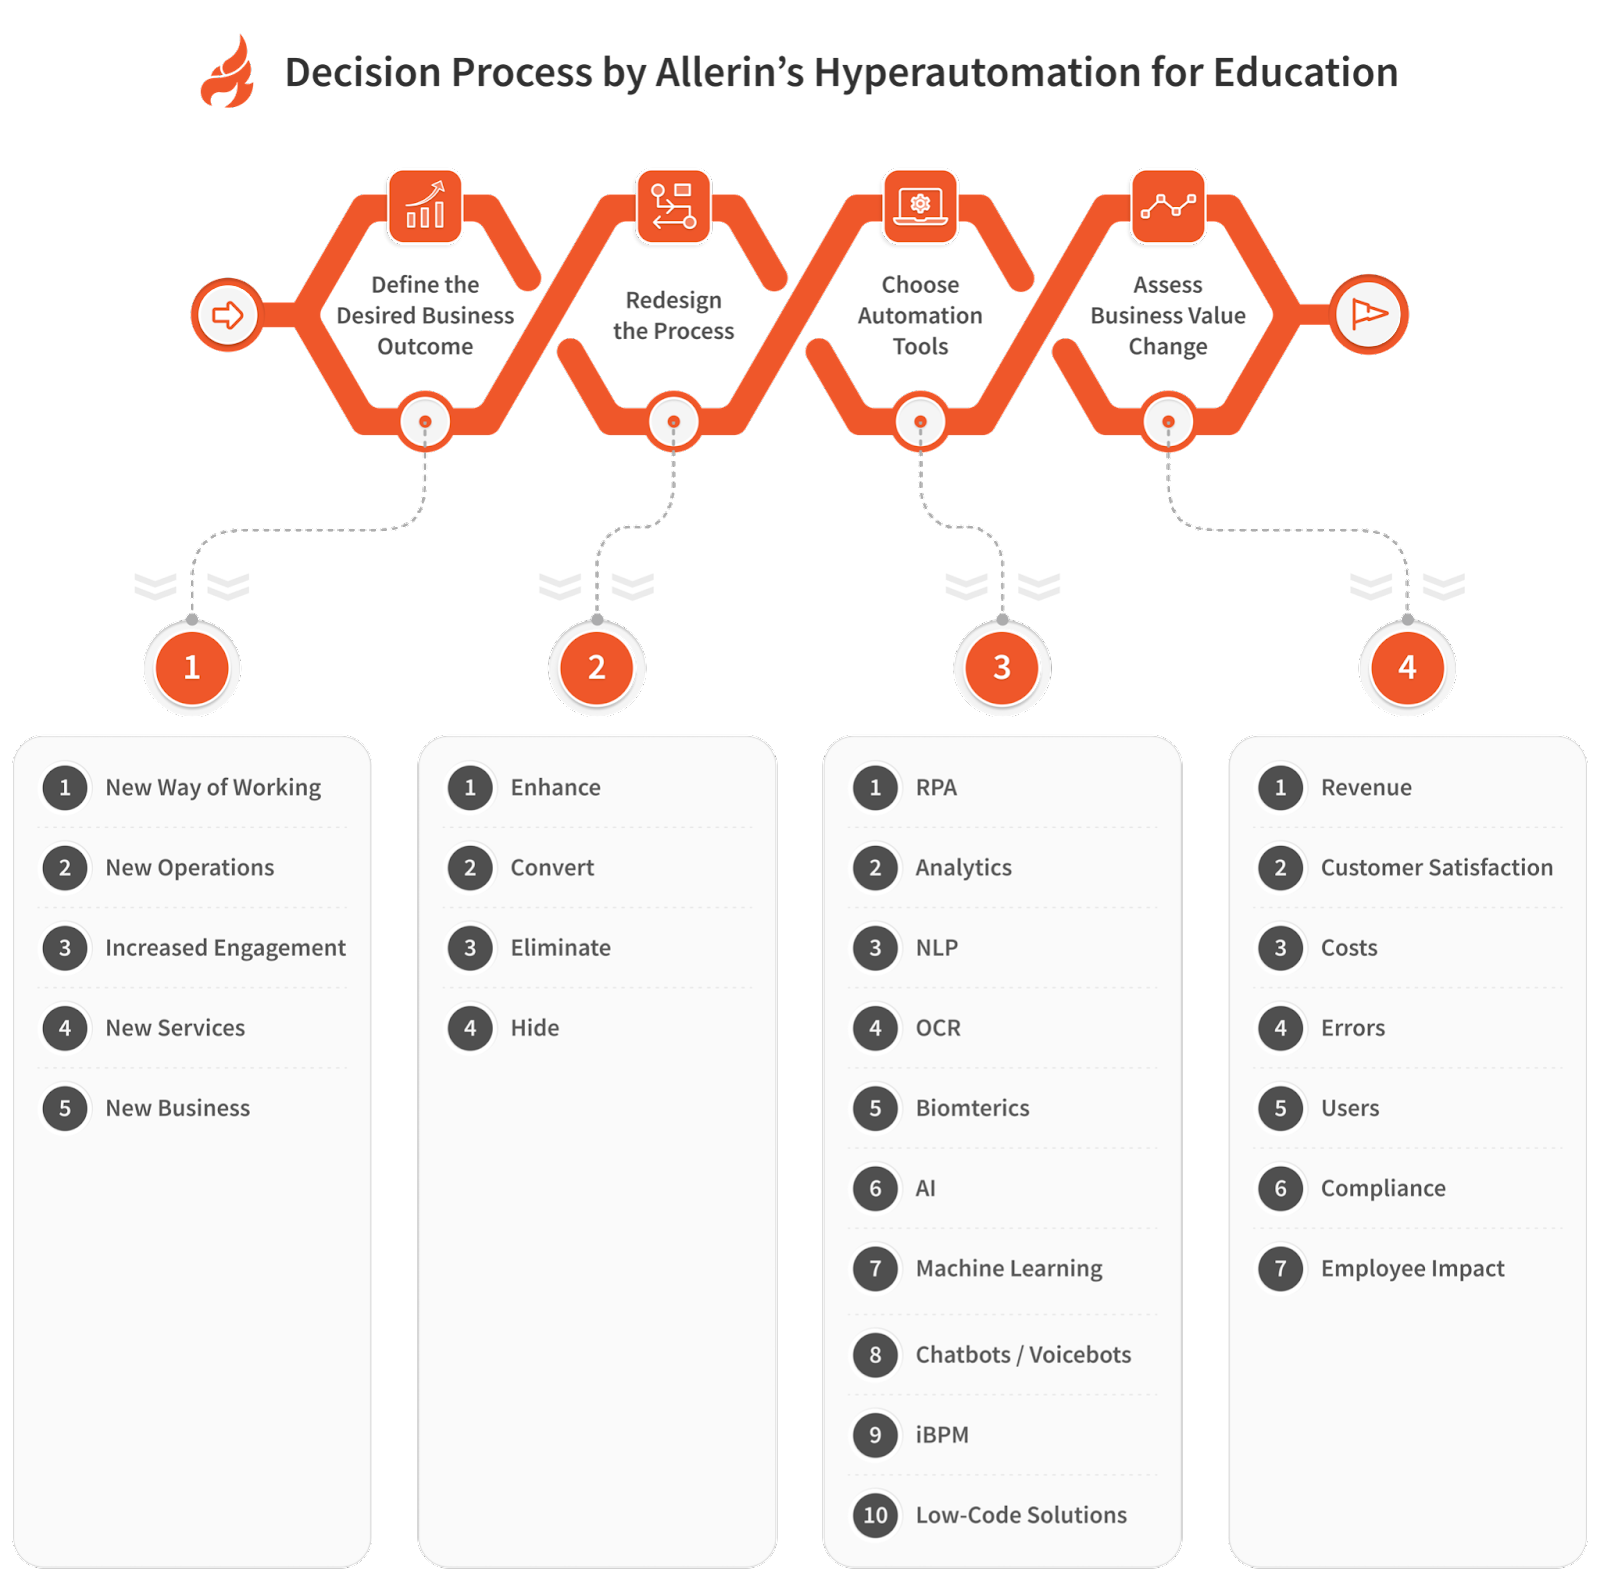 Design Process by Allerin's Hyperautomation for Education